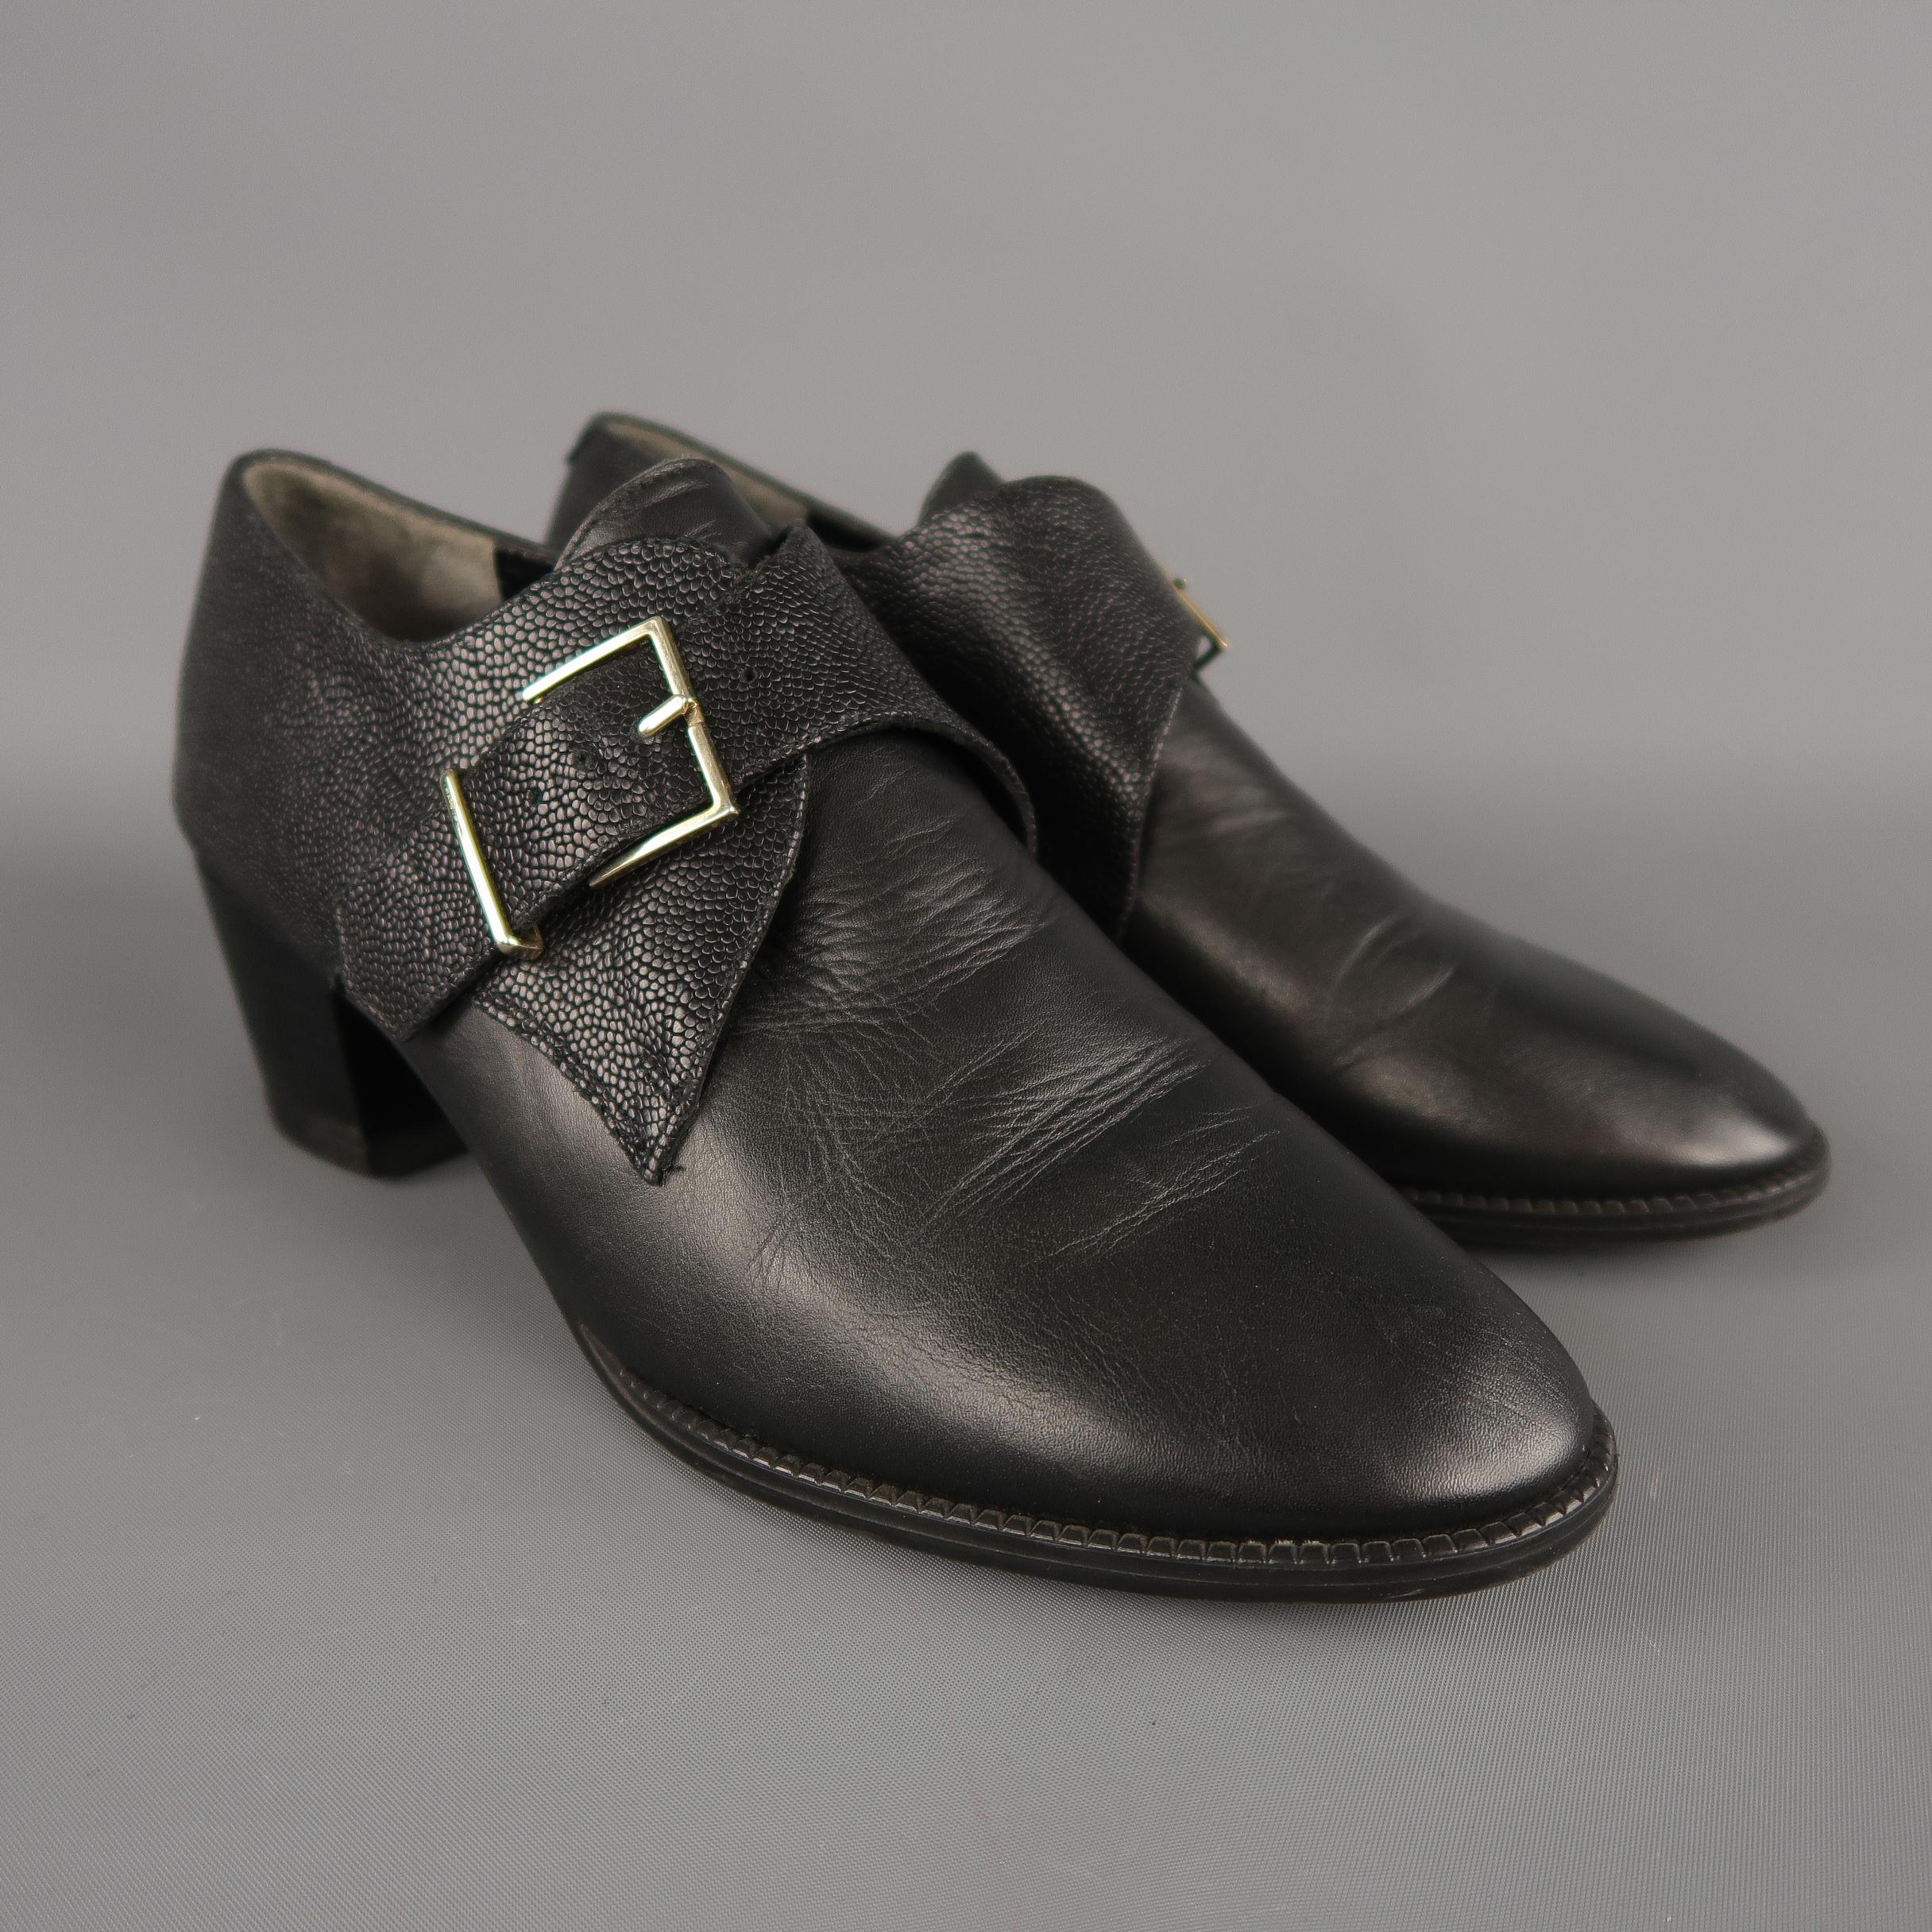 ROBERT CLERGERIE shoes come in smooth black leather with a chunky heel, and lizard textured leather monk strap panel. Made in France. retail price $542.00
 
 
Excellent Pre-Owned Condition.
Marked: IT 38.5
 
Measurements:
 
Heel: 1.75 in.